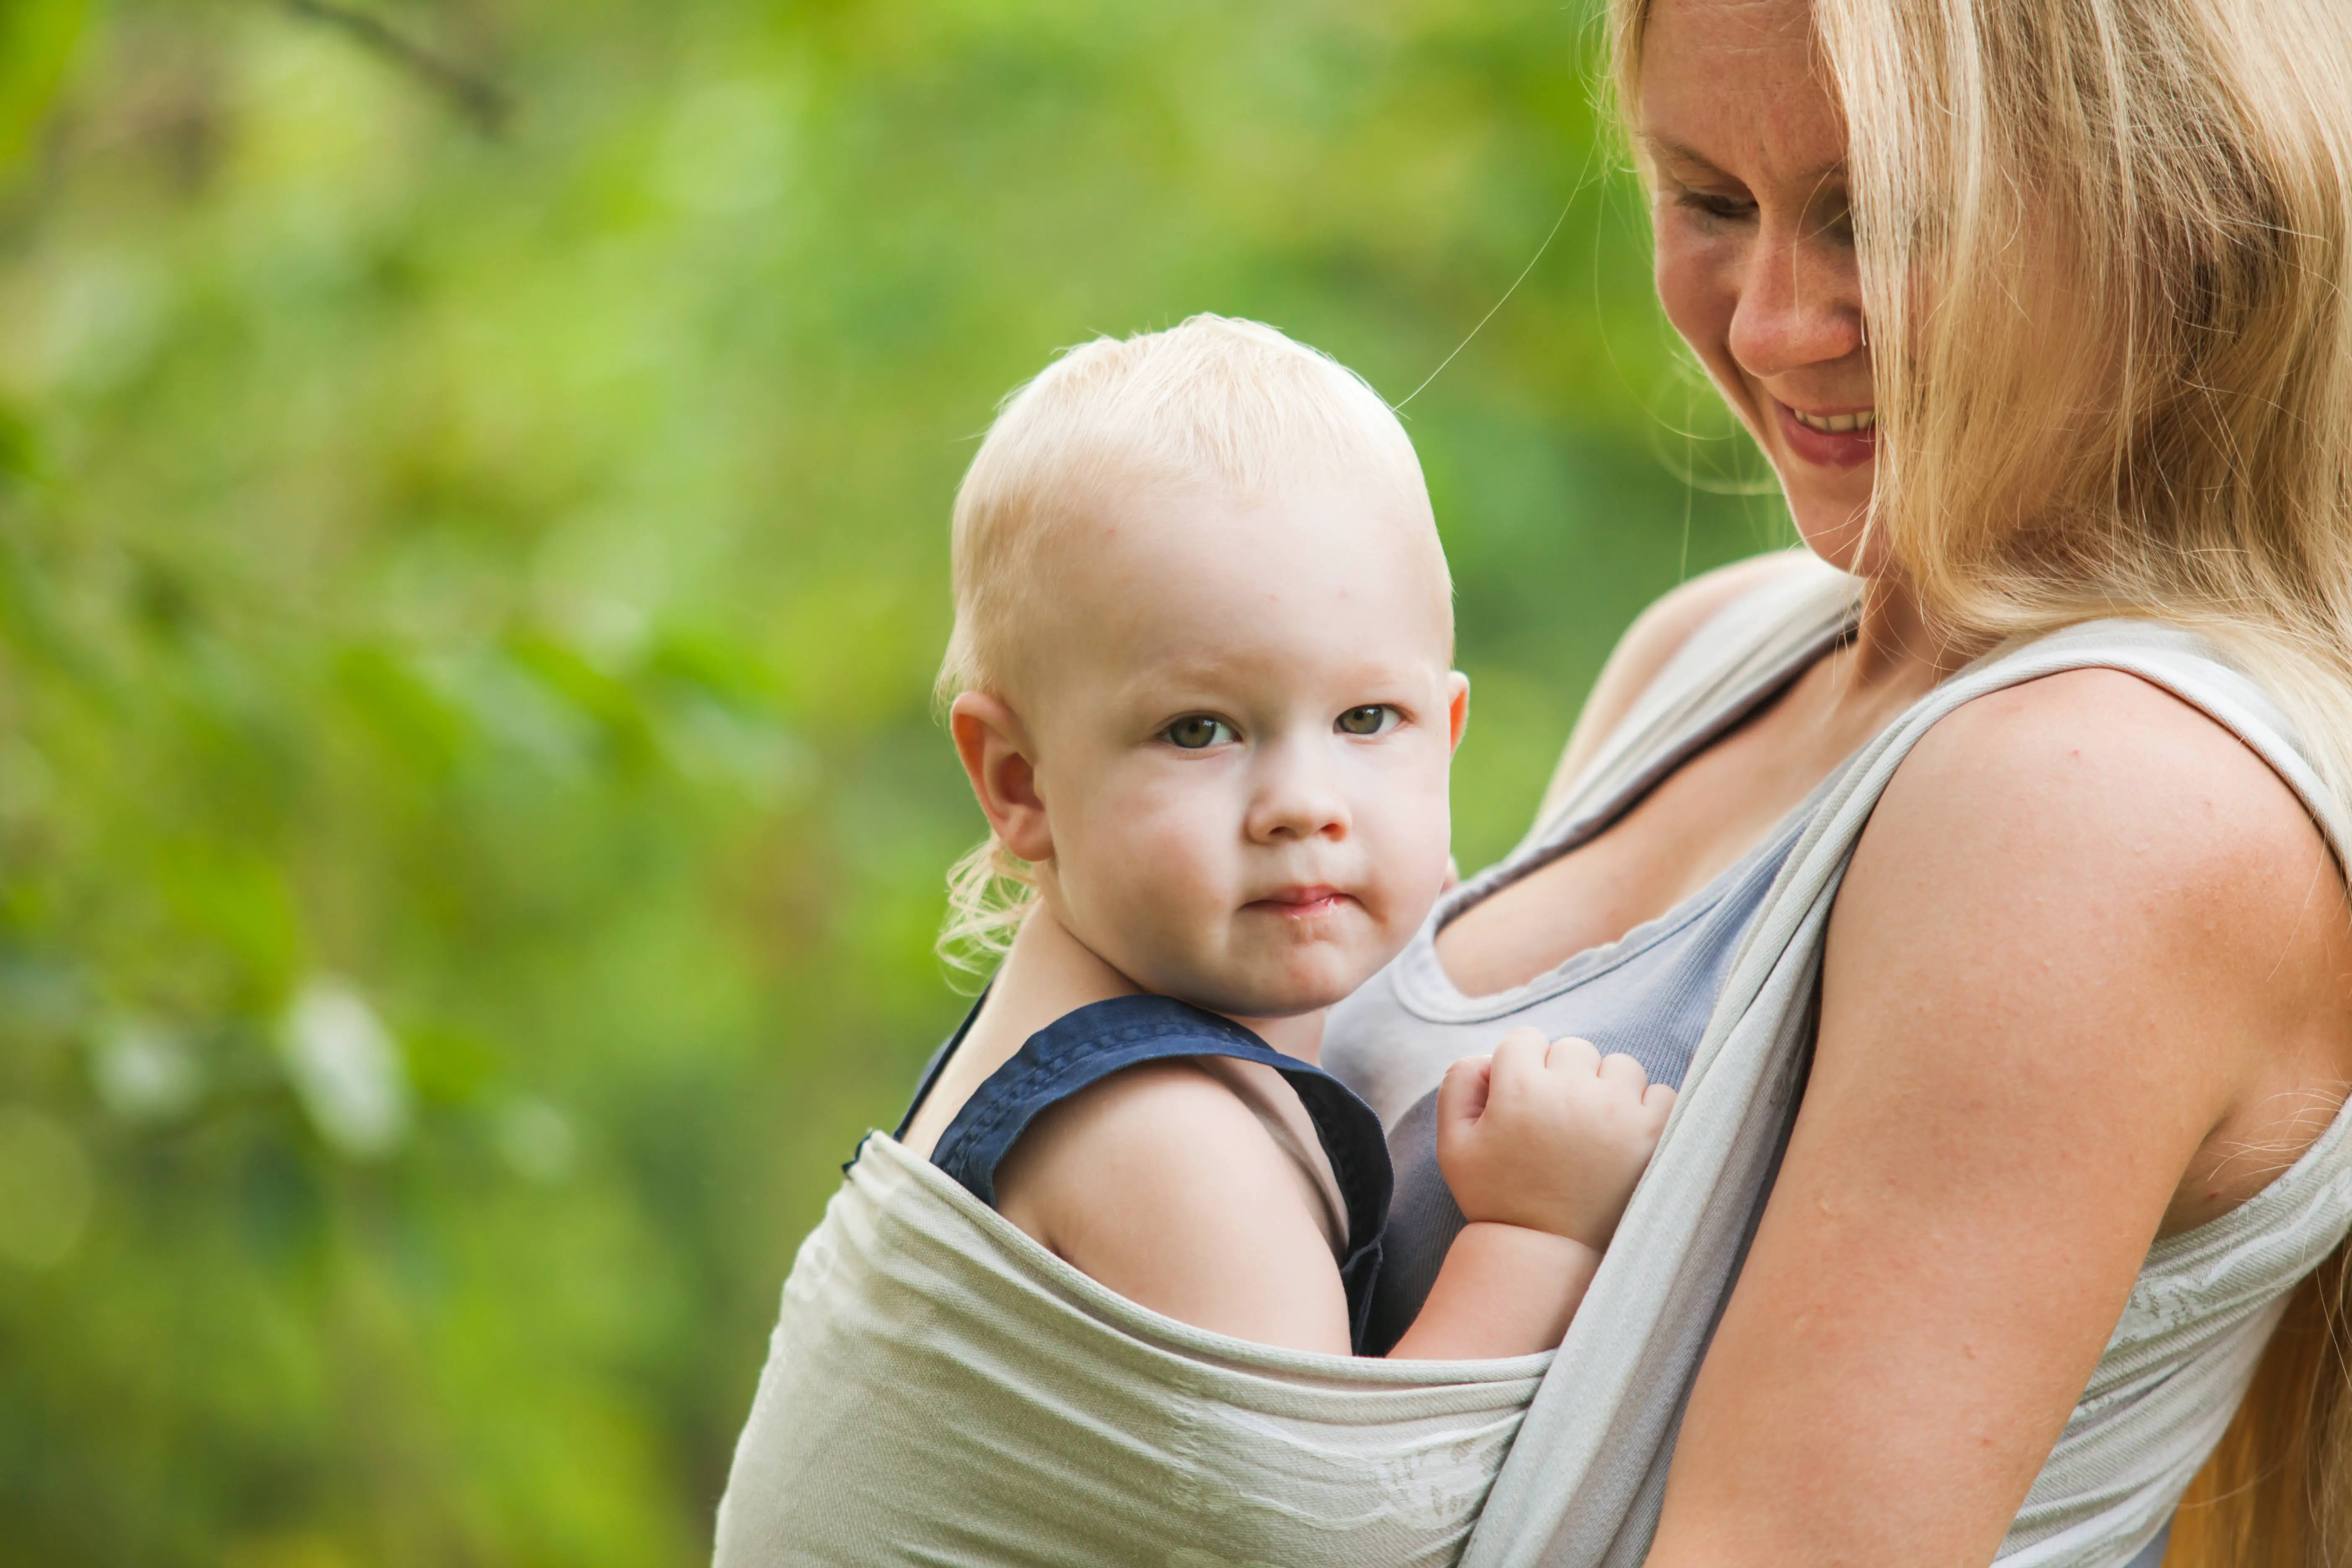 Why And How To Use A Baby Sling?